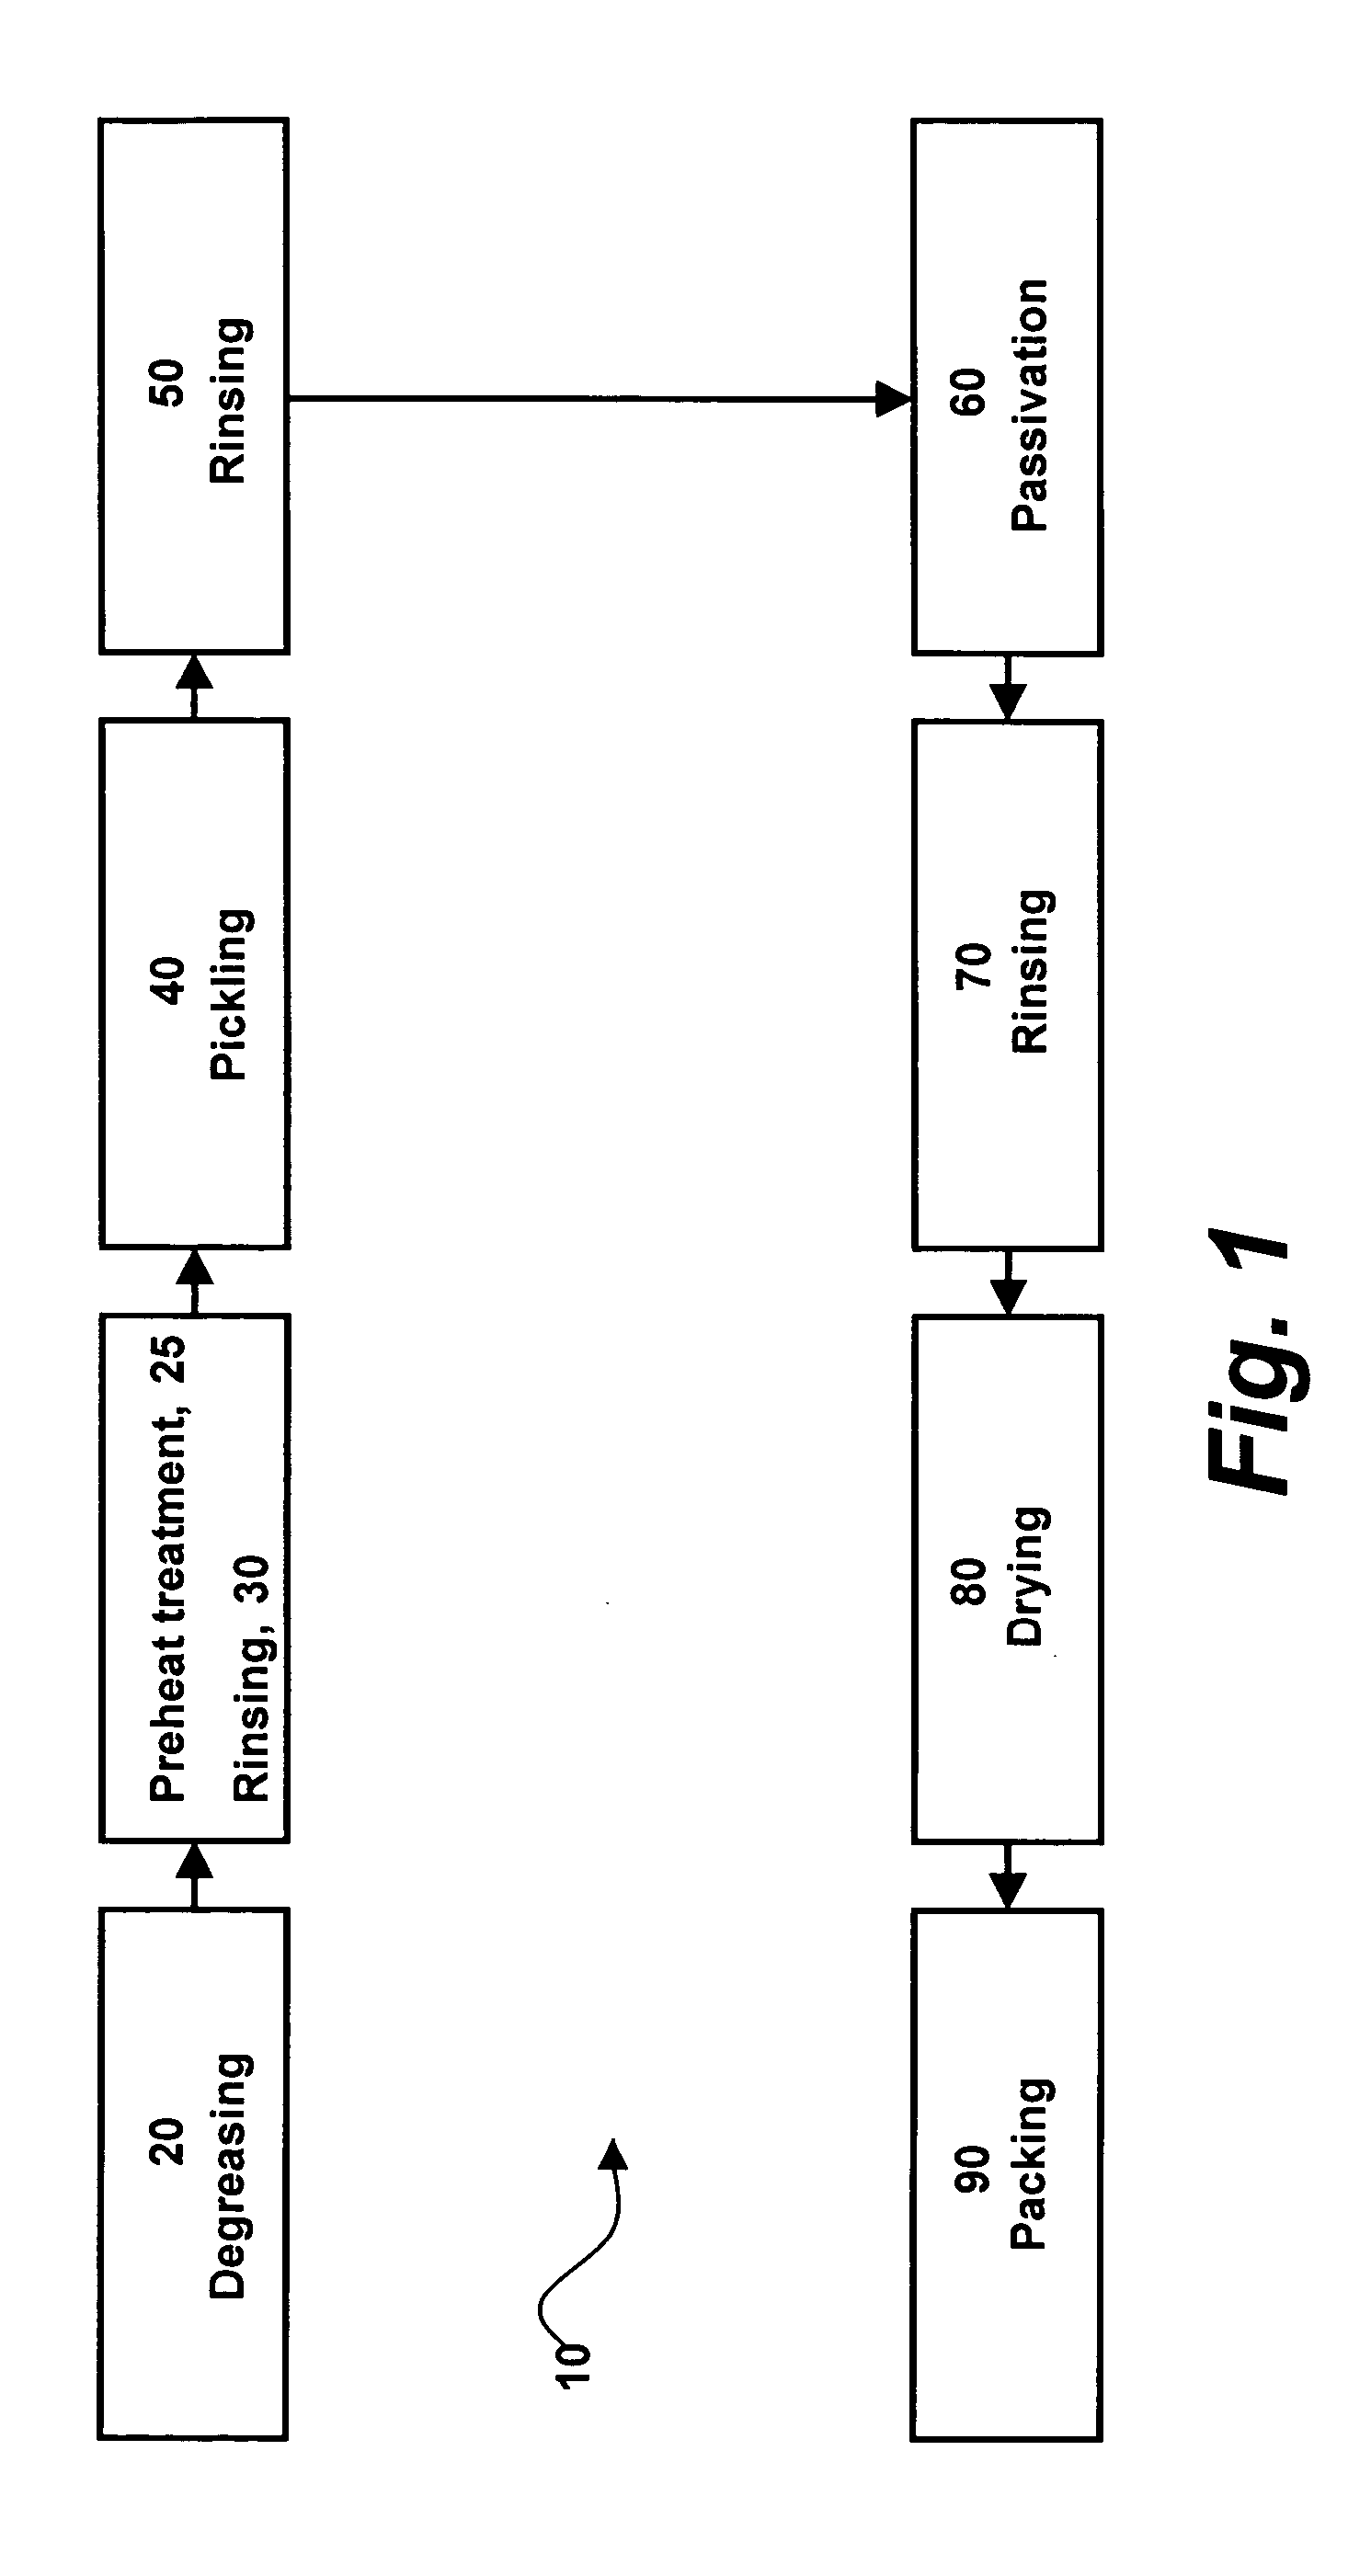 Amorphous oxide surface film for metallic implantable devices and method for production thereof